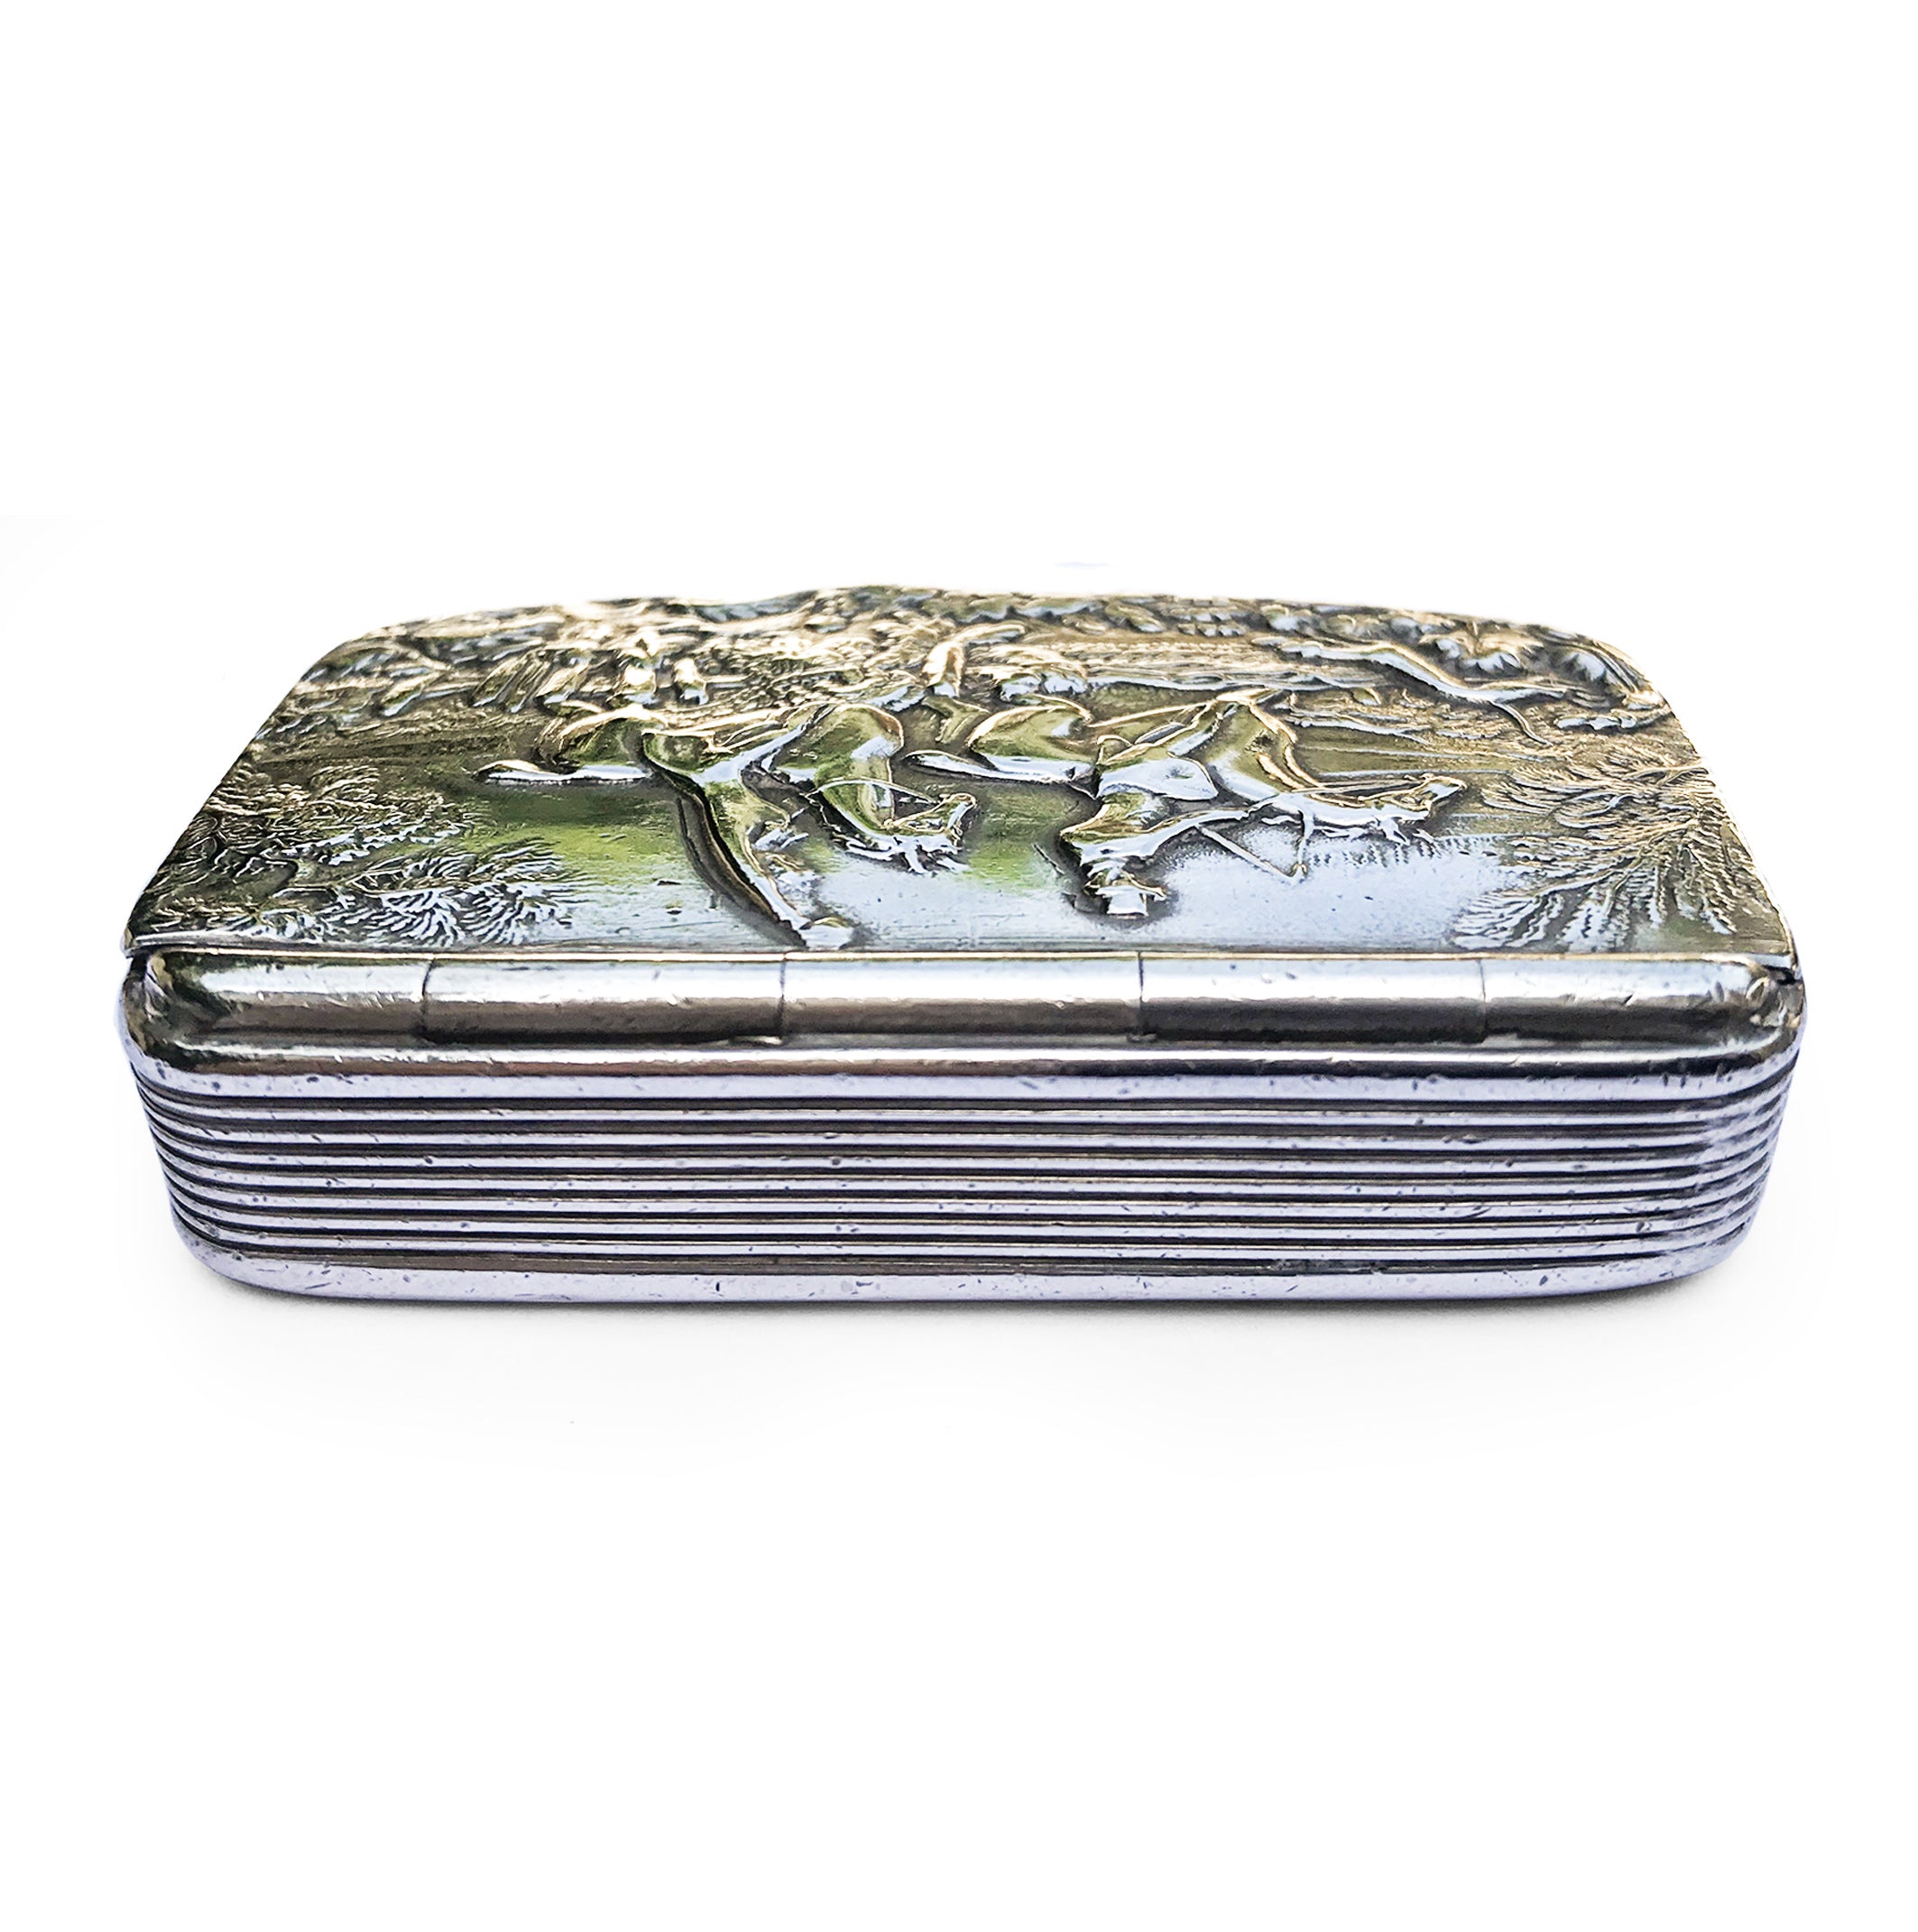 Pewter Snuff Box by Fribourg & Treyer